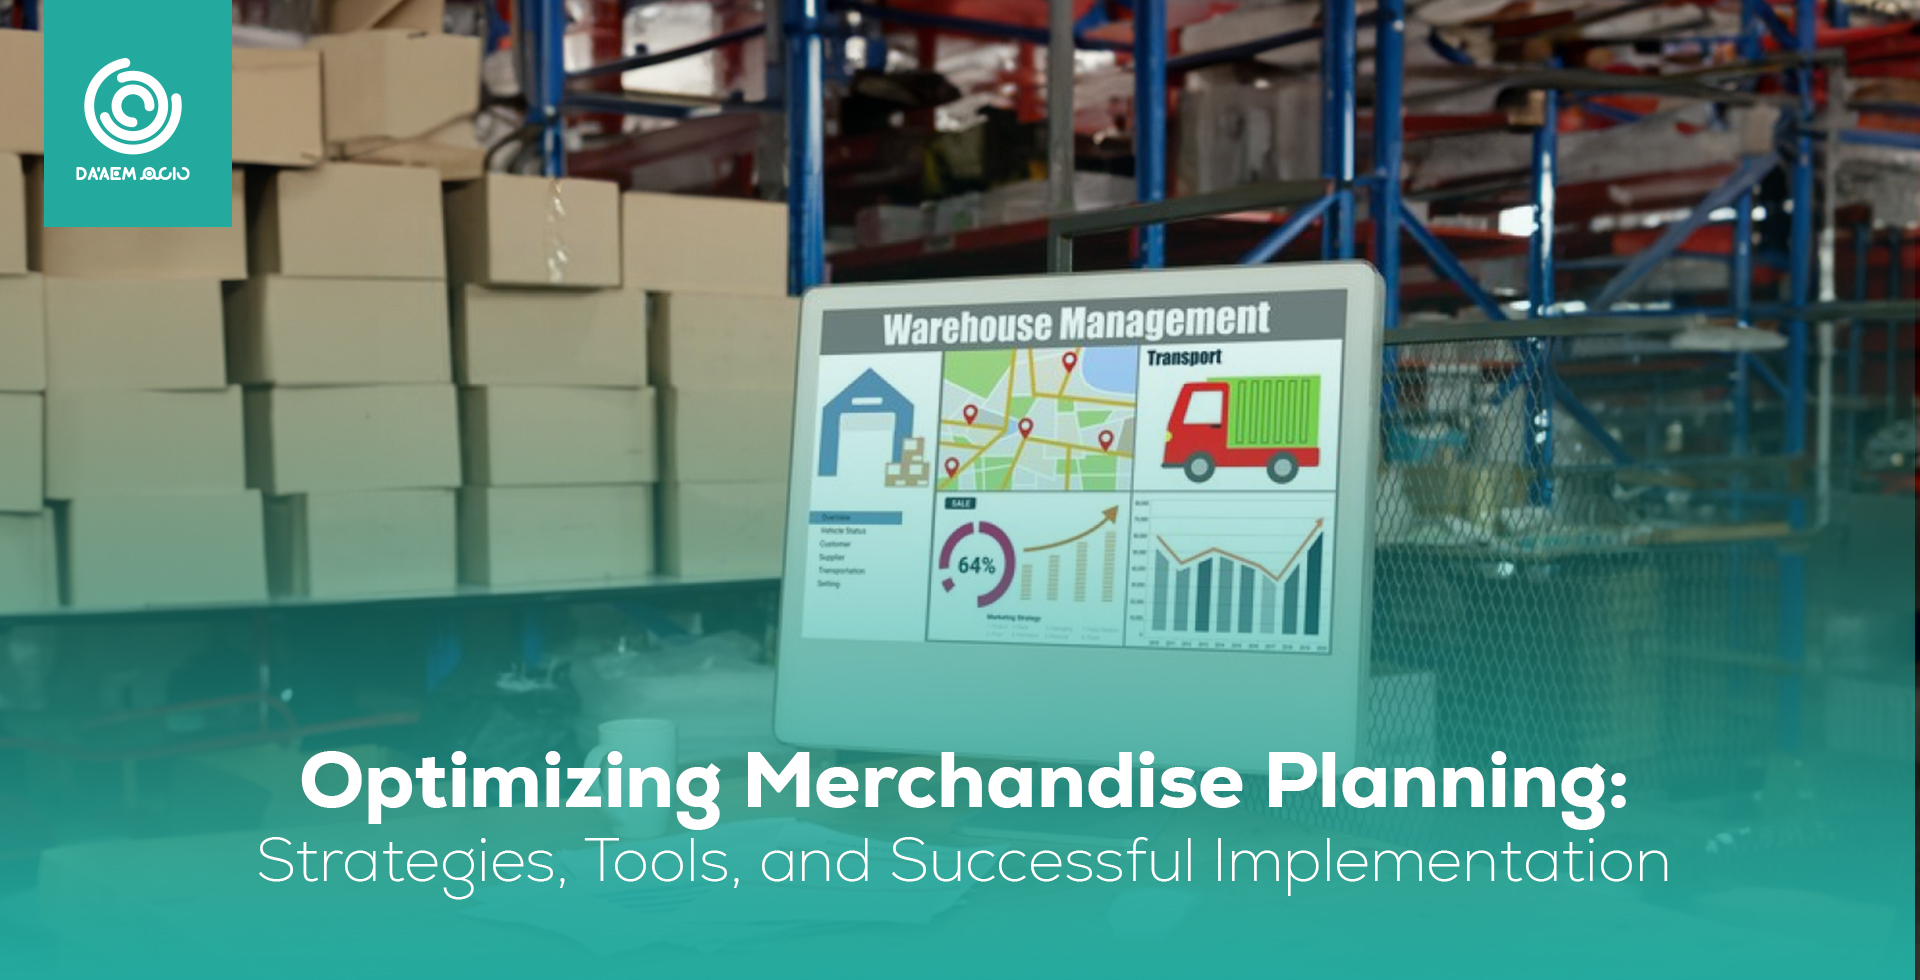 Optimizing Merchandise Planning: Strategies, Tools, and Successful Implementation